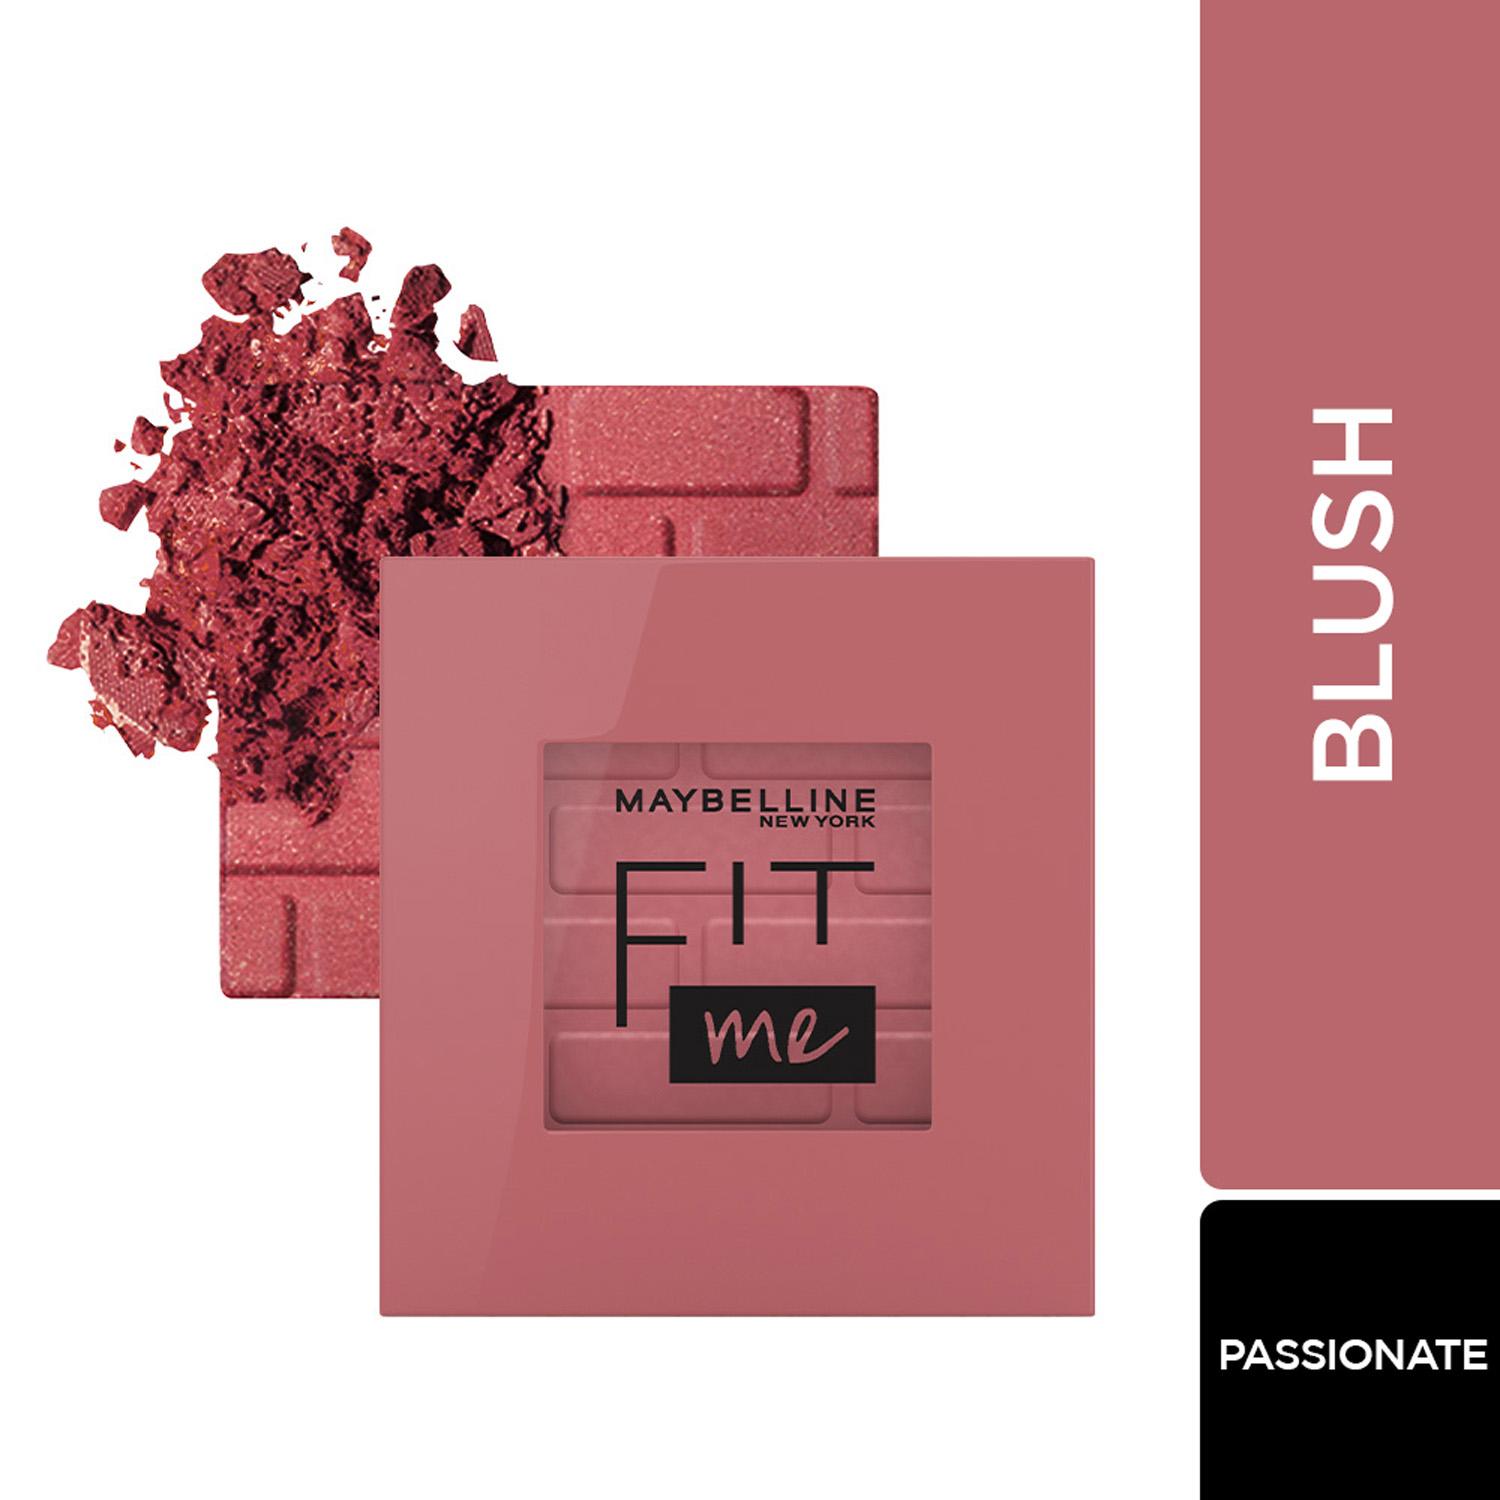 Maybelline New York | Maybelline New York Fit Me Mono Blush - 60 Passionate (26.8g)